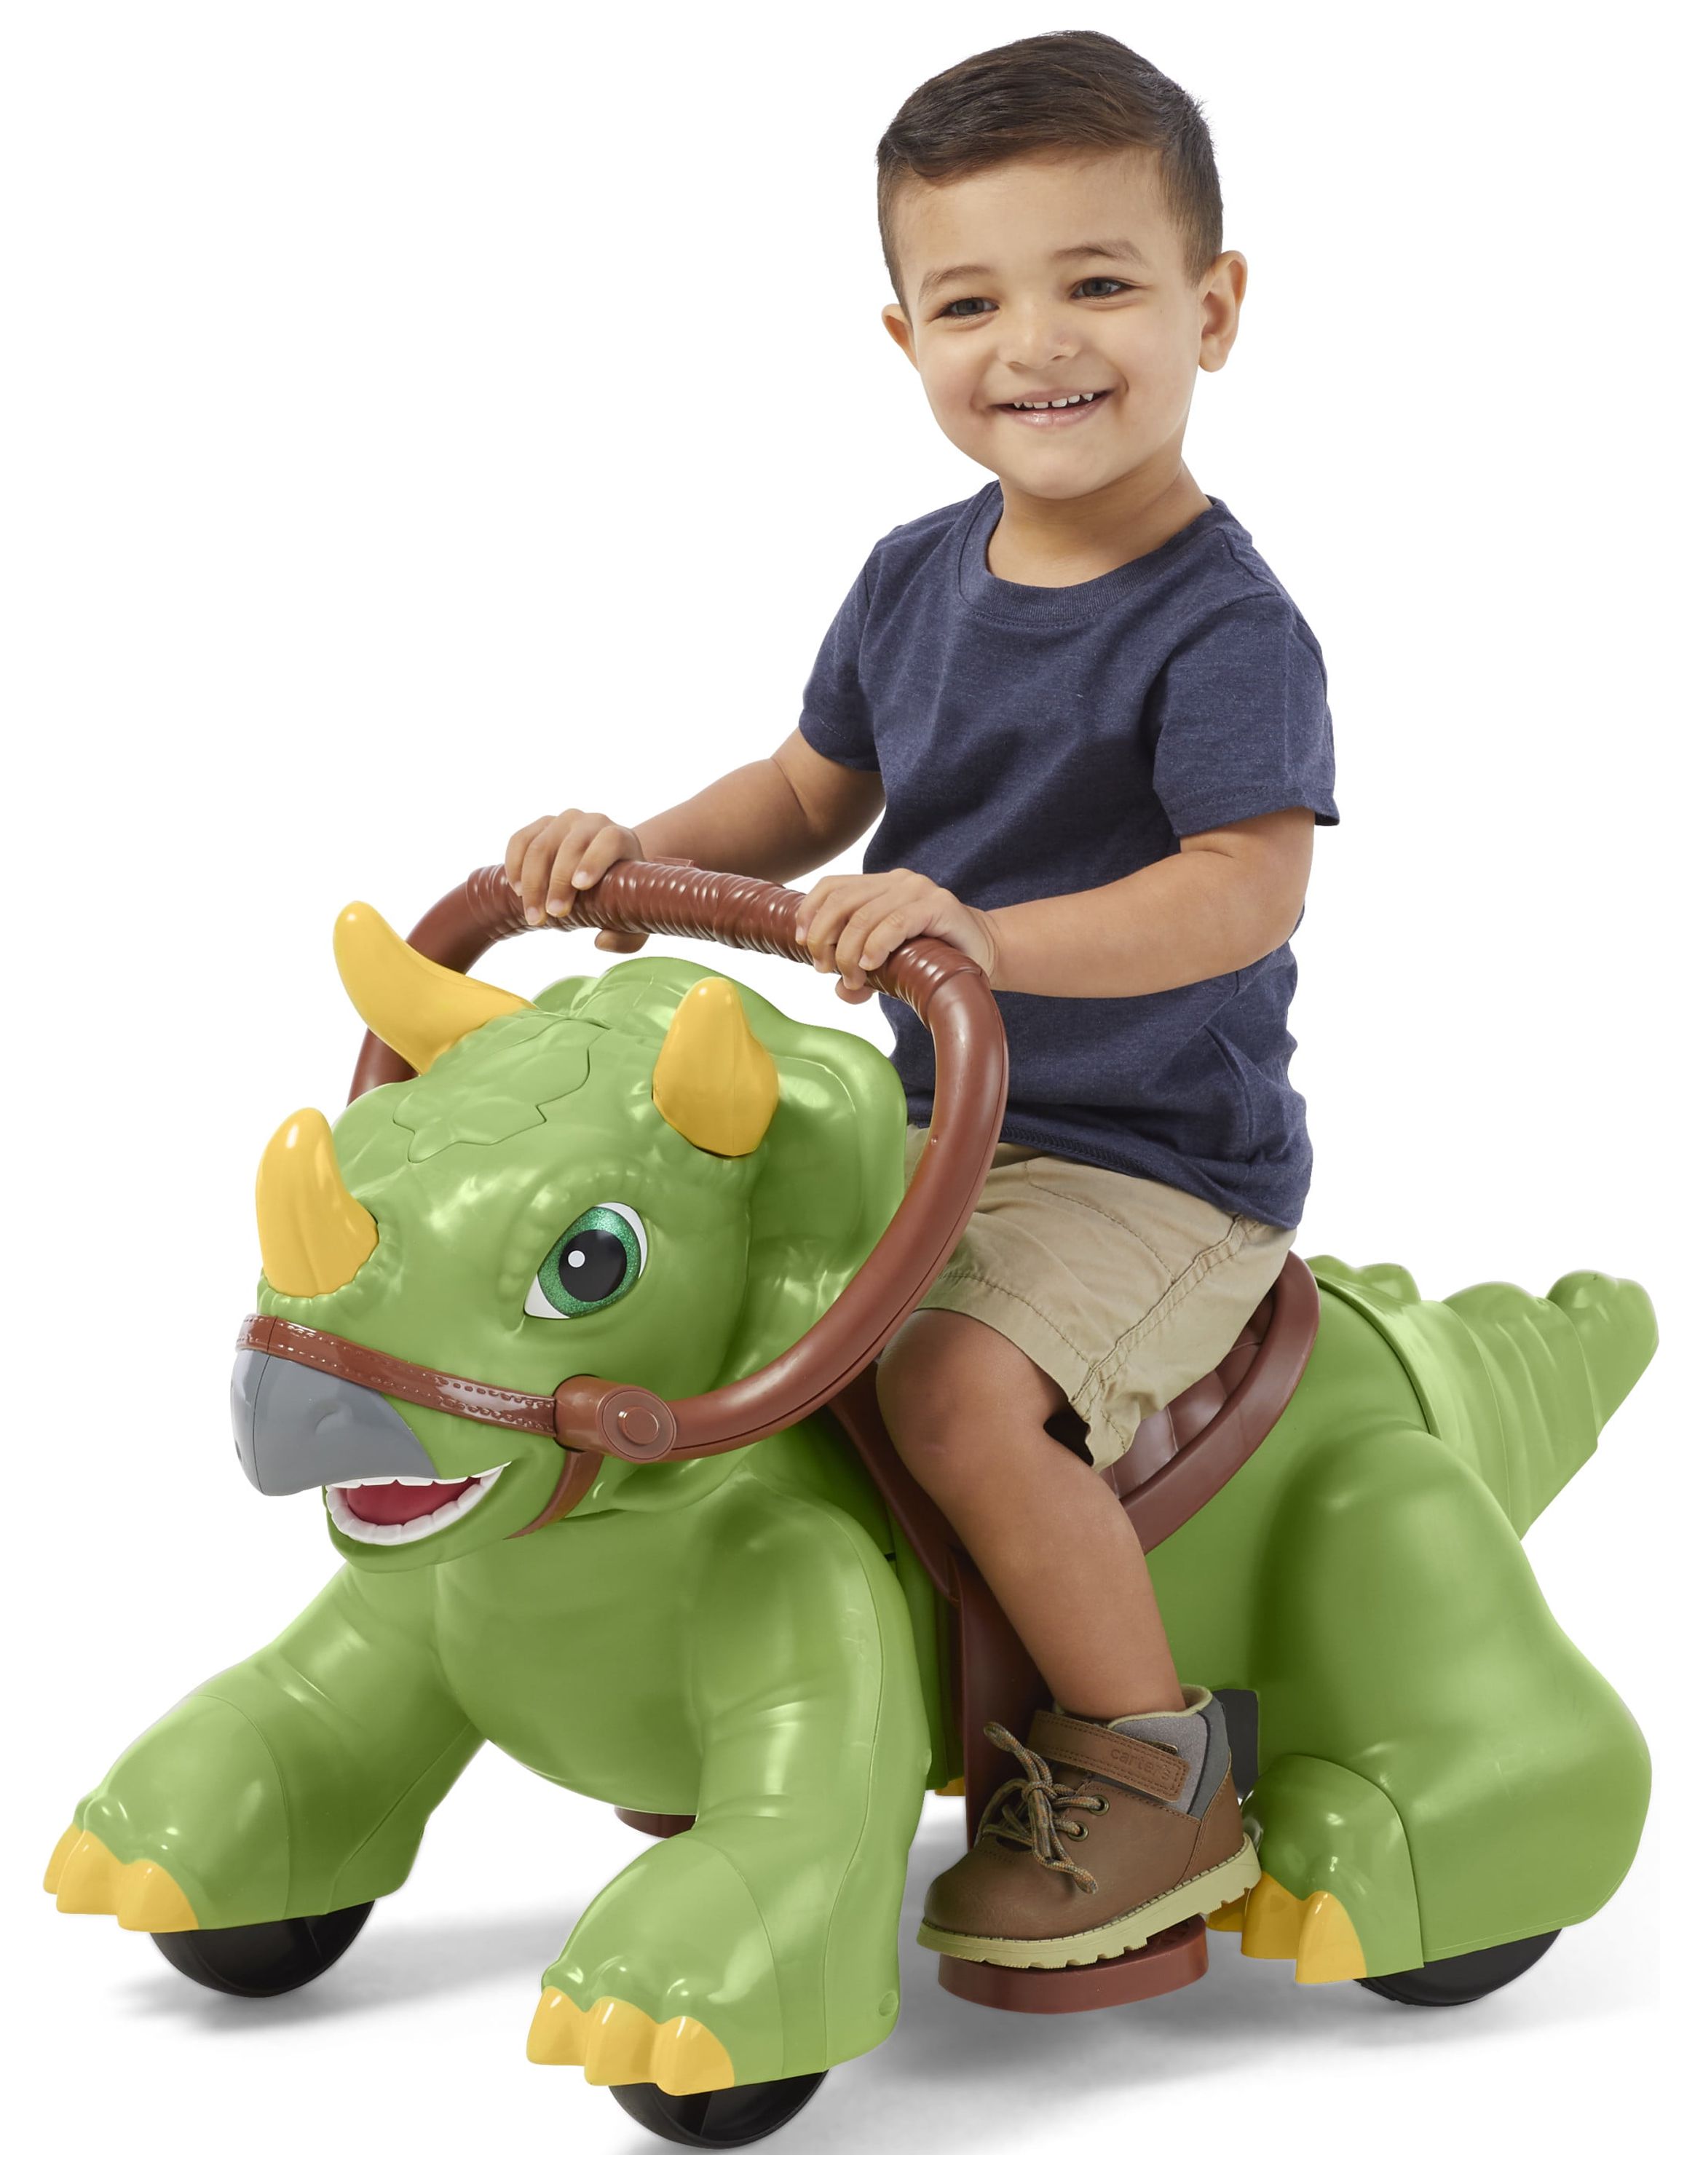 Rideamals Dinosaur Ride-On Toy by Kid Trax, powered rechargeable toddler, boys or girls, toddler - image 1 of 10